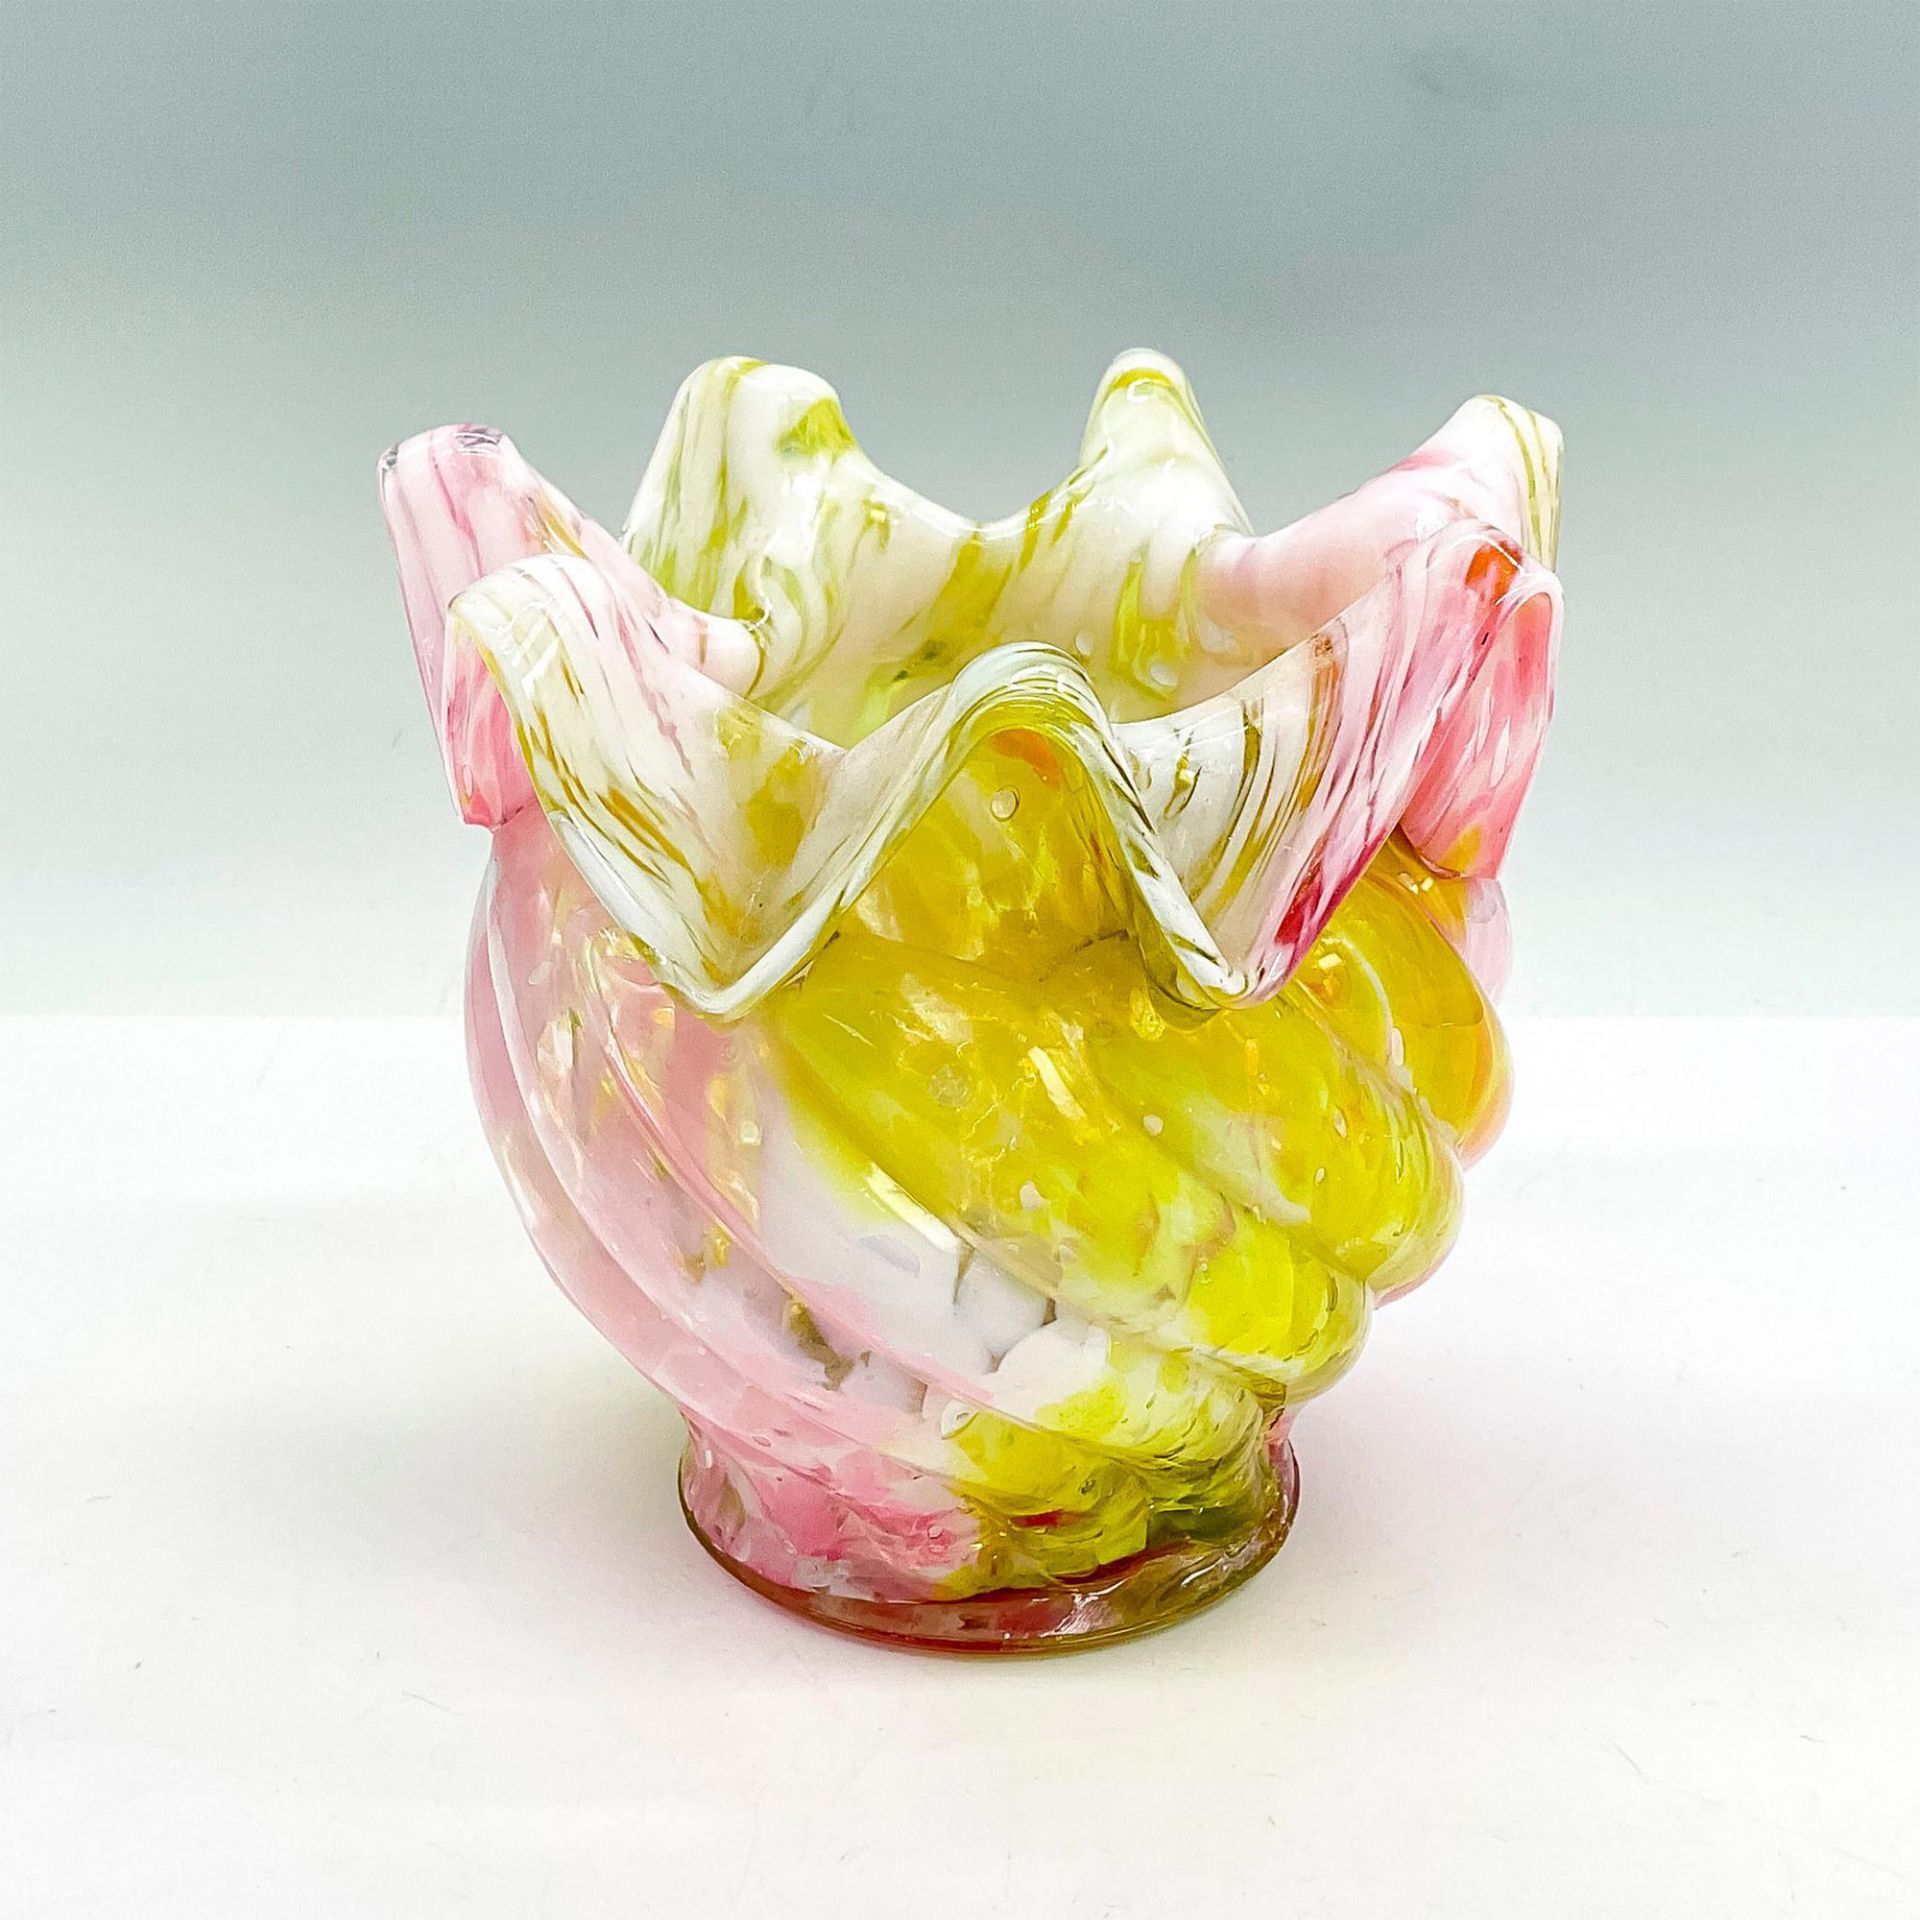 Vintage Splatter Glass Vase, Pink, White and Yellow - Image 2 of 3